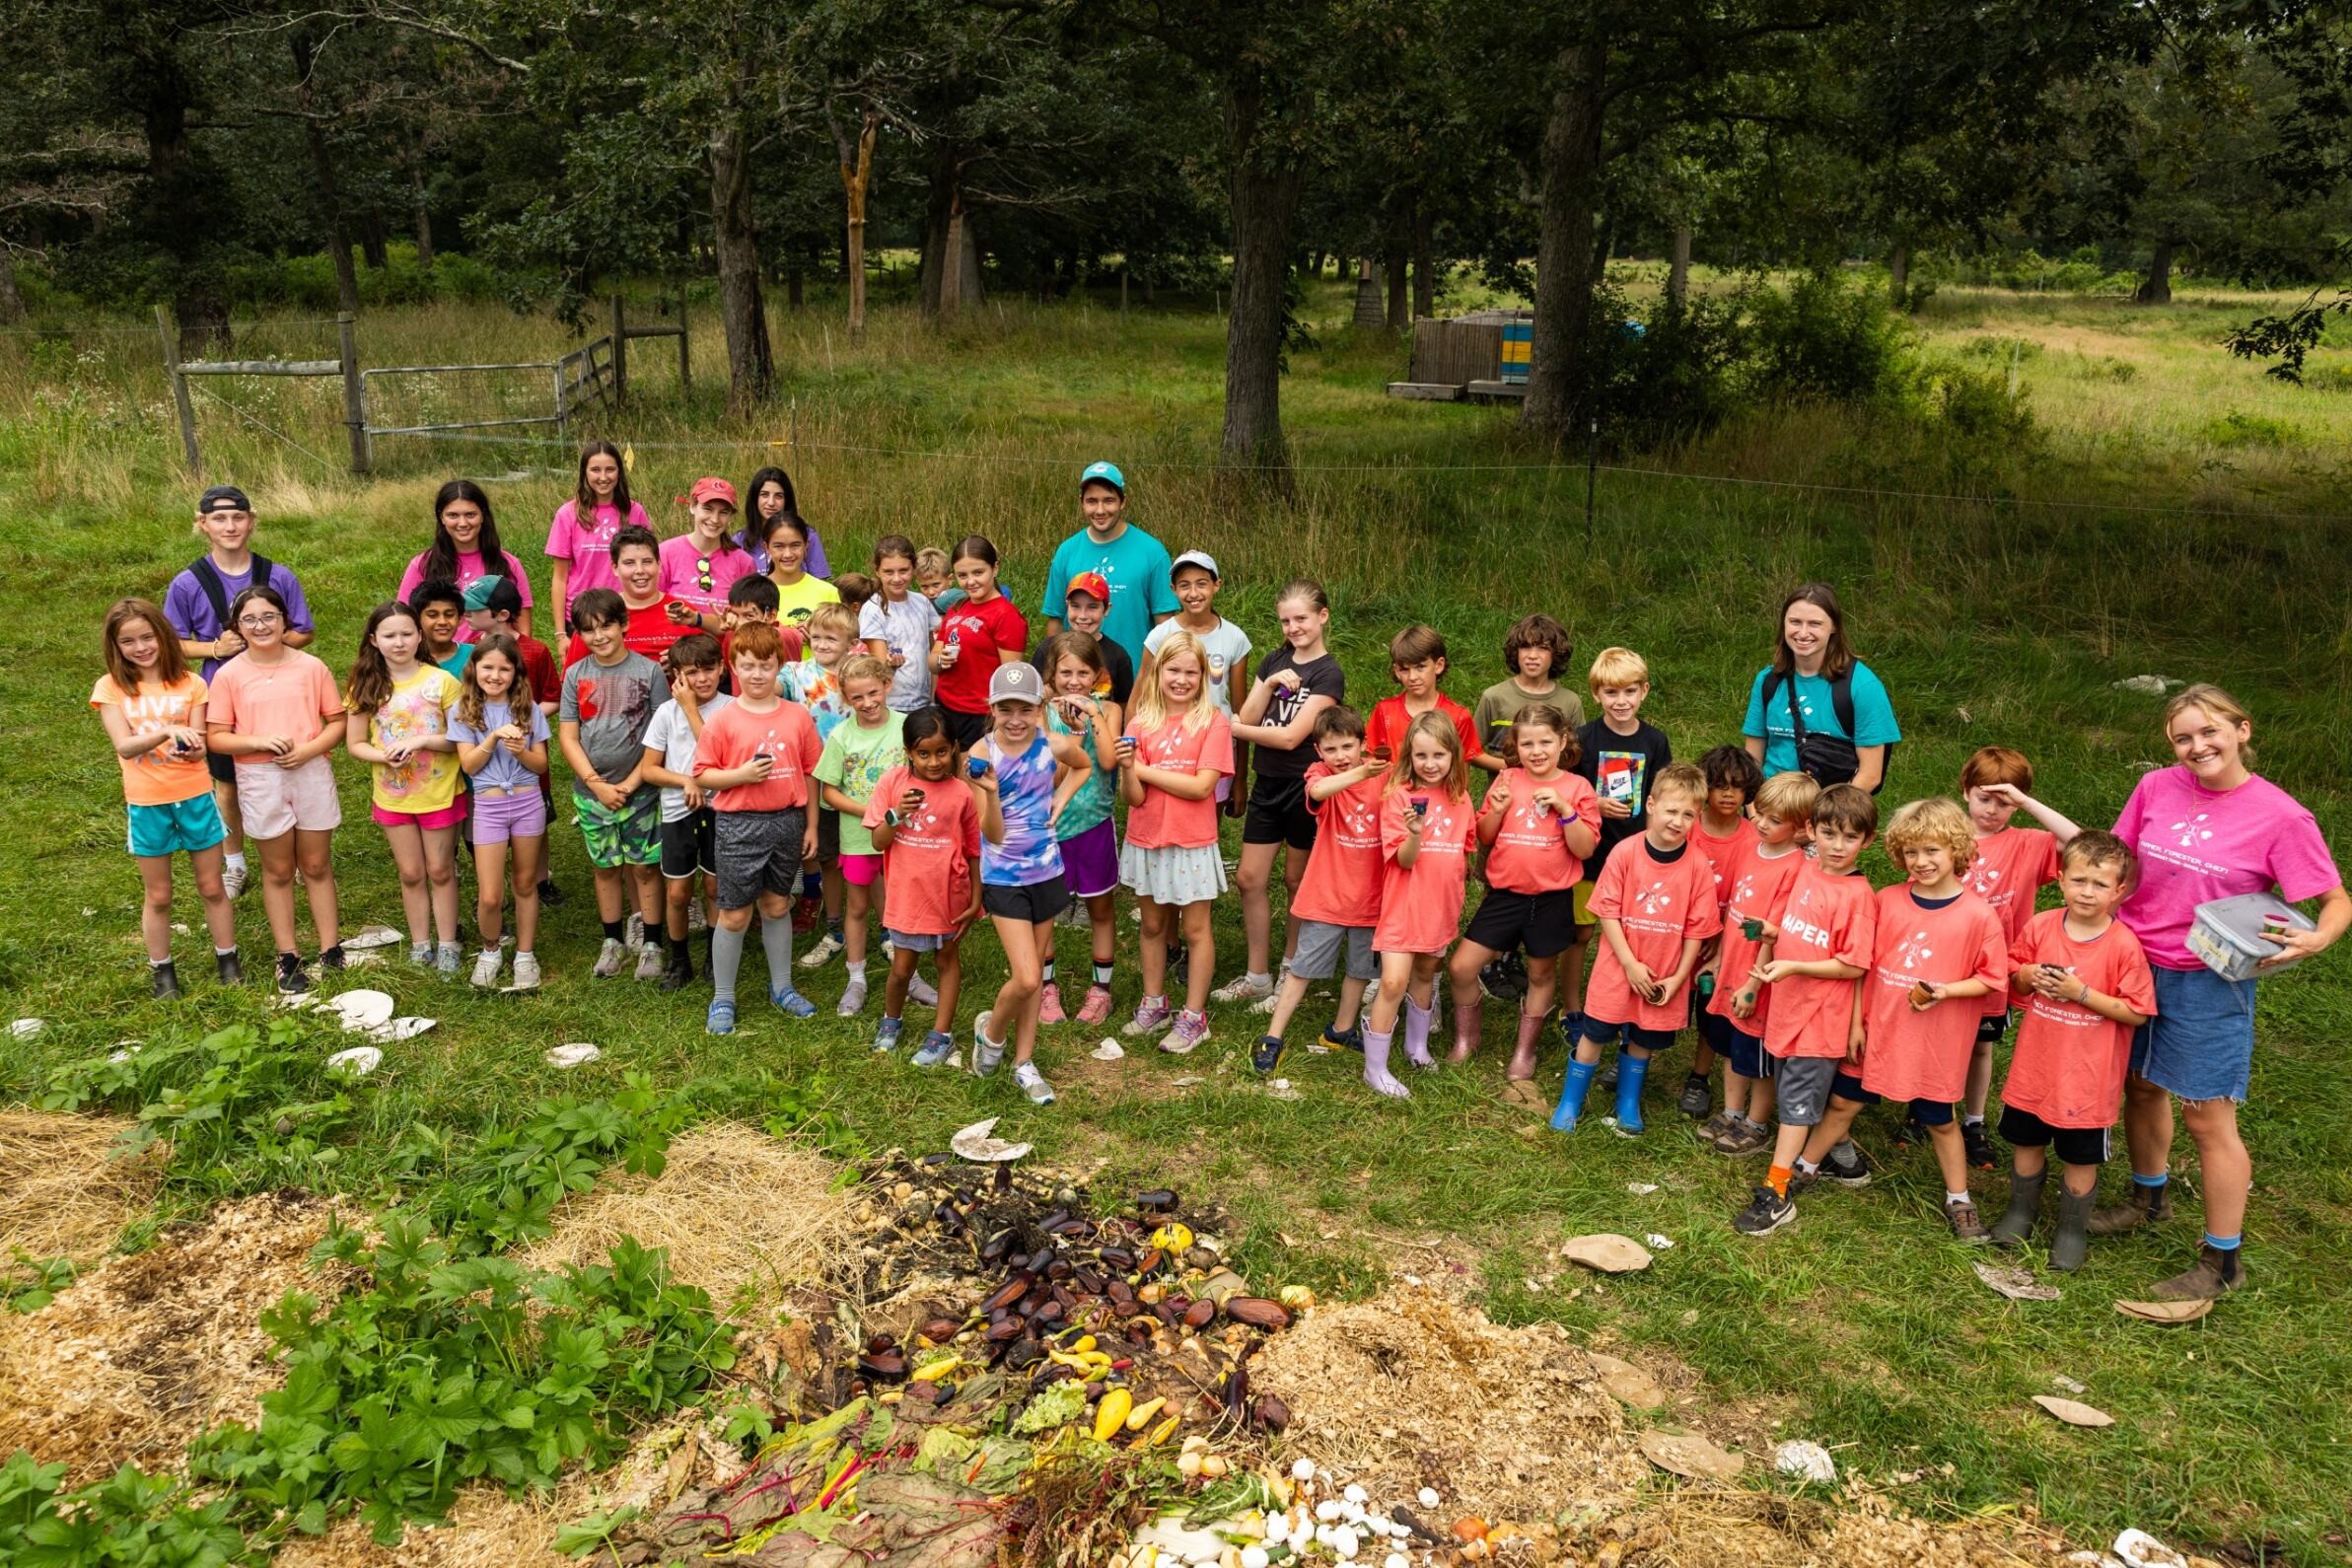 Campers pose next to a vegetable garden